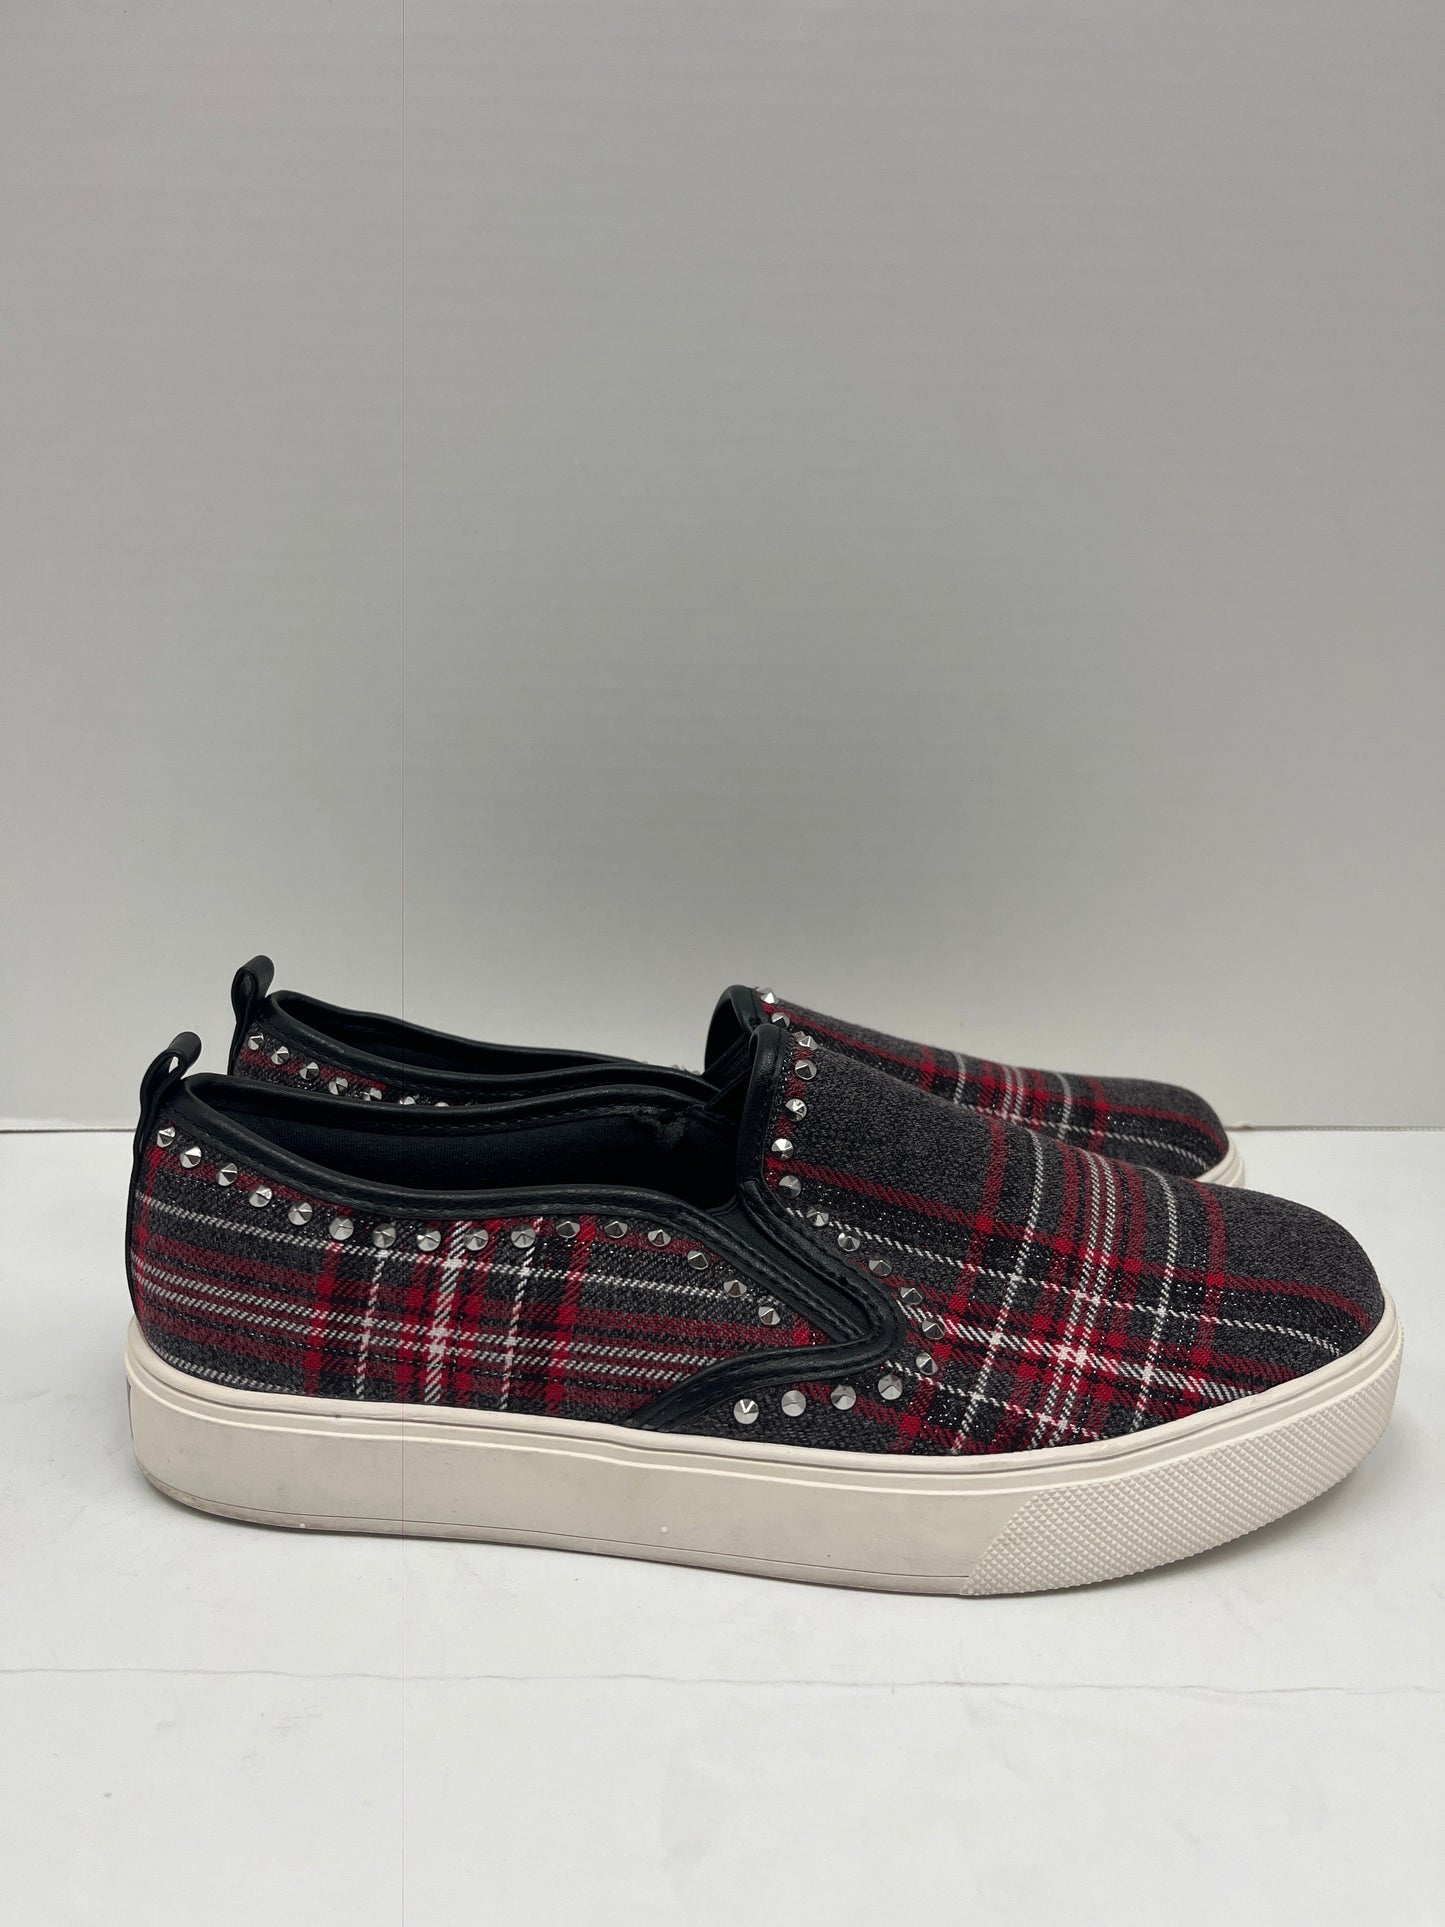 Shoes Sneakers By Aldo  Size: 8